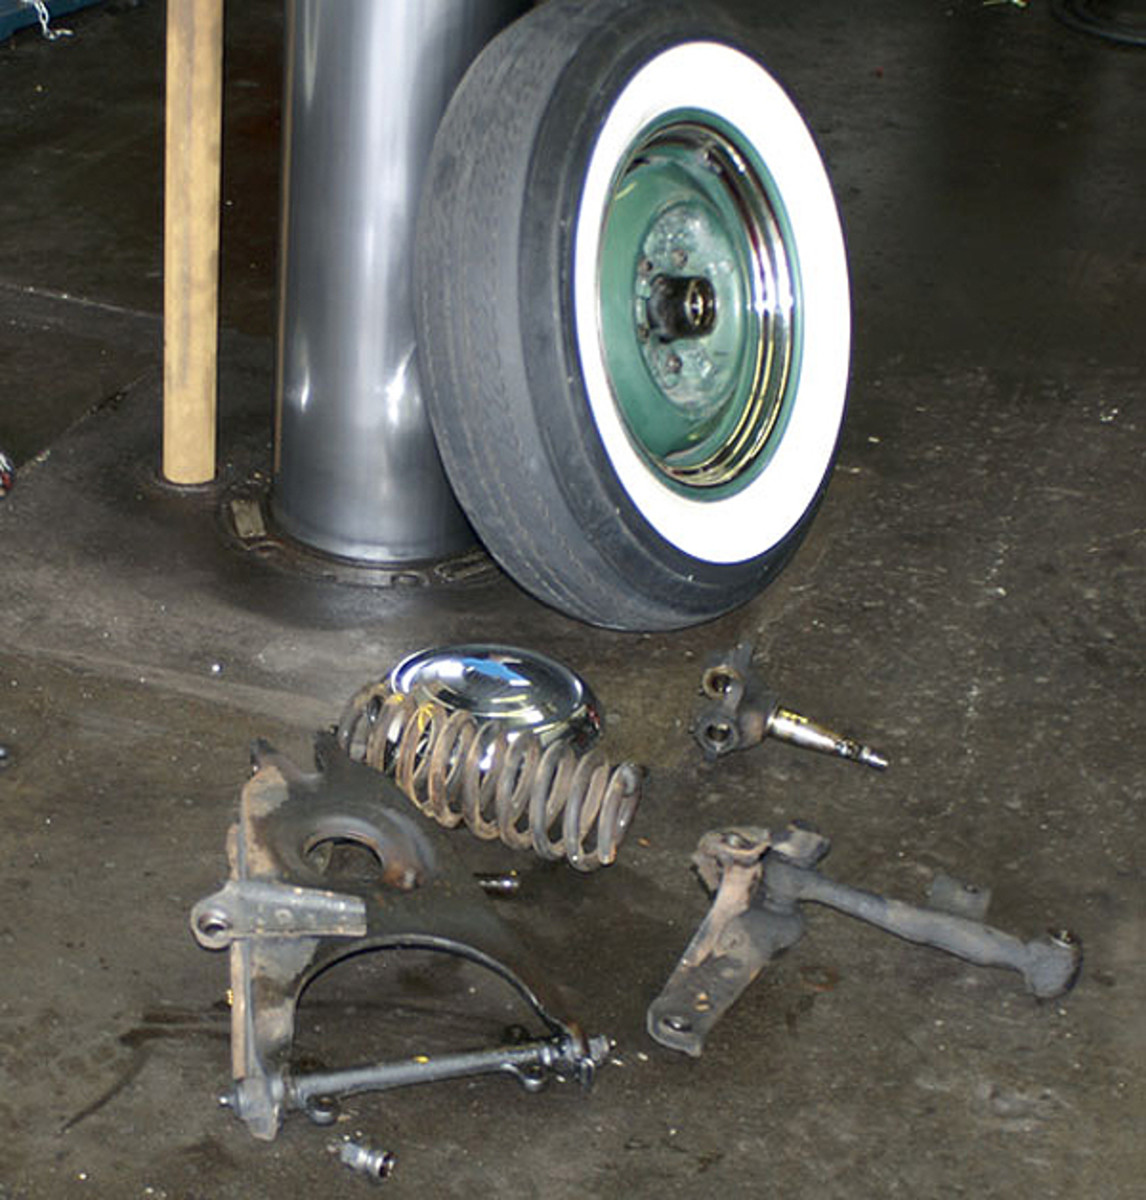  The 1951 Chevrolet's components after assembly